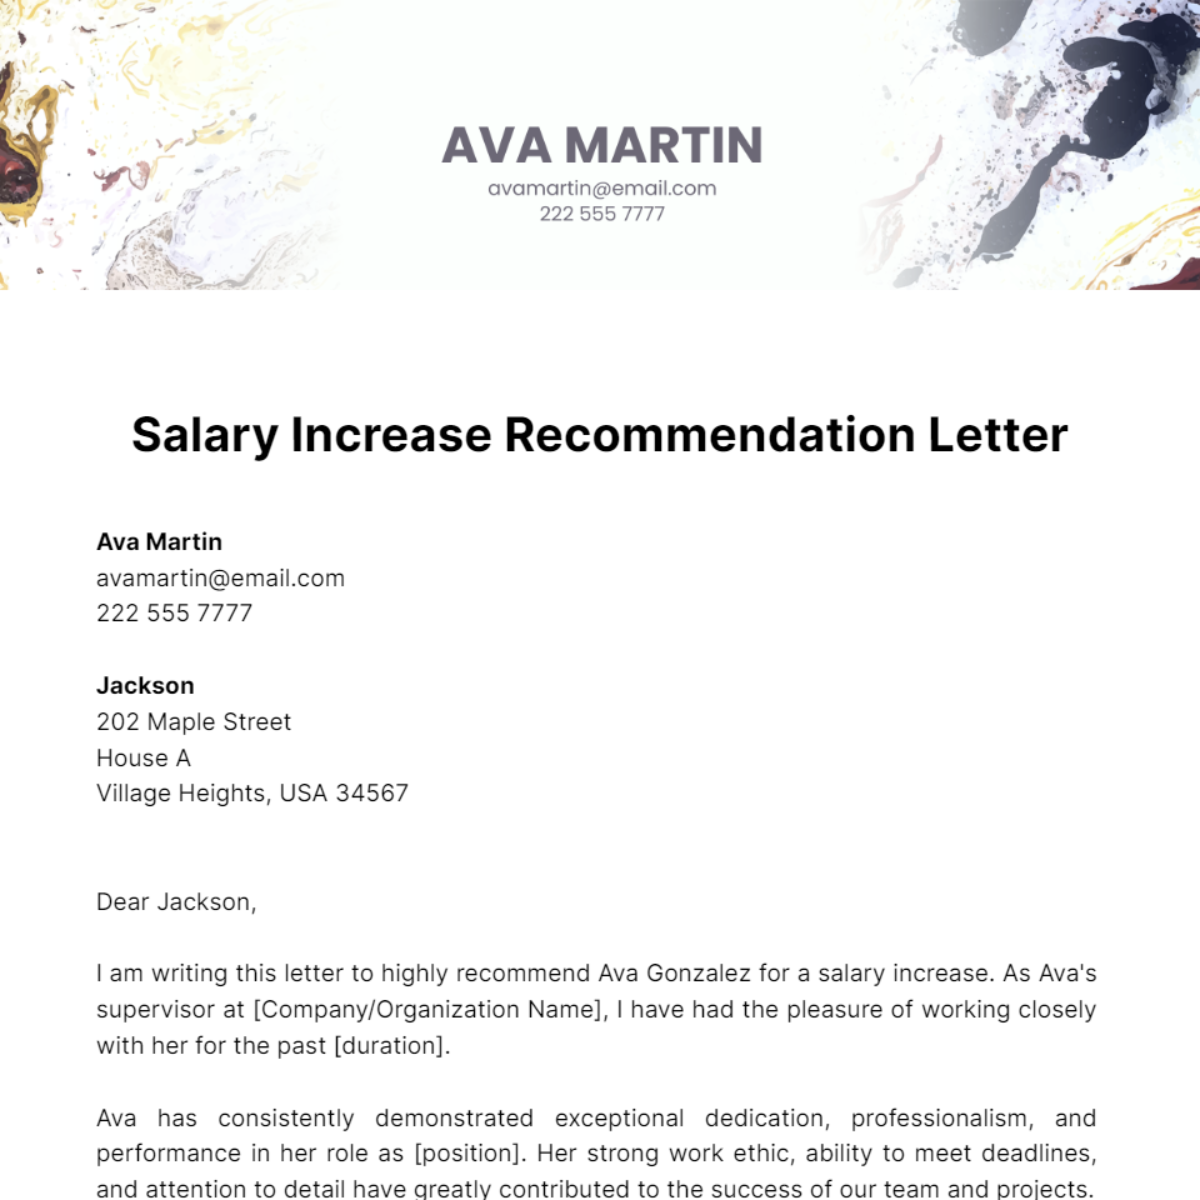 Salary Increase Recommendation Letter Template